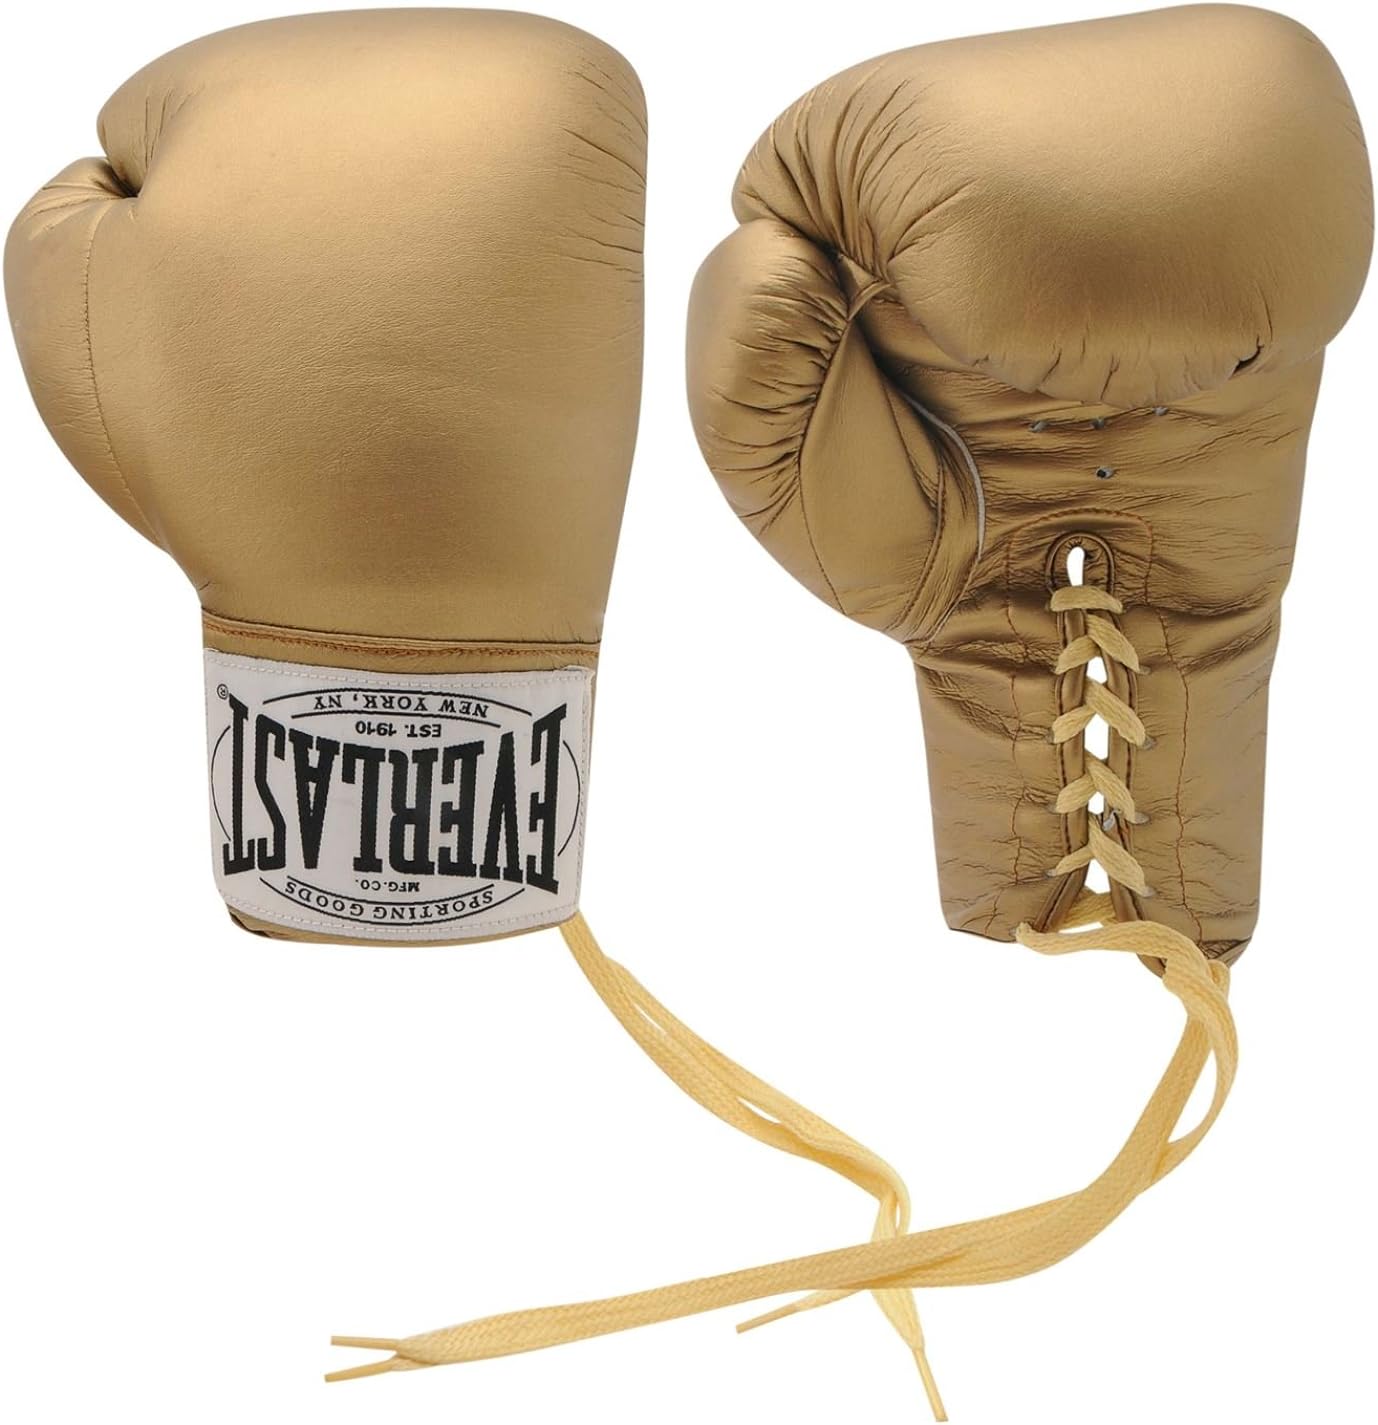 Image of a boxing glove